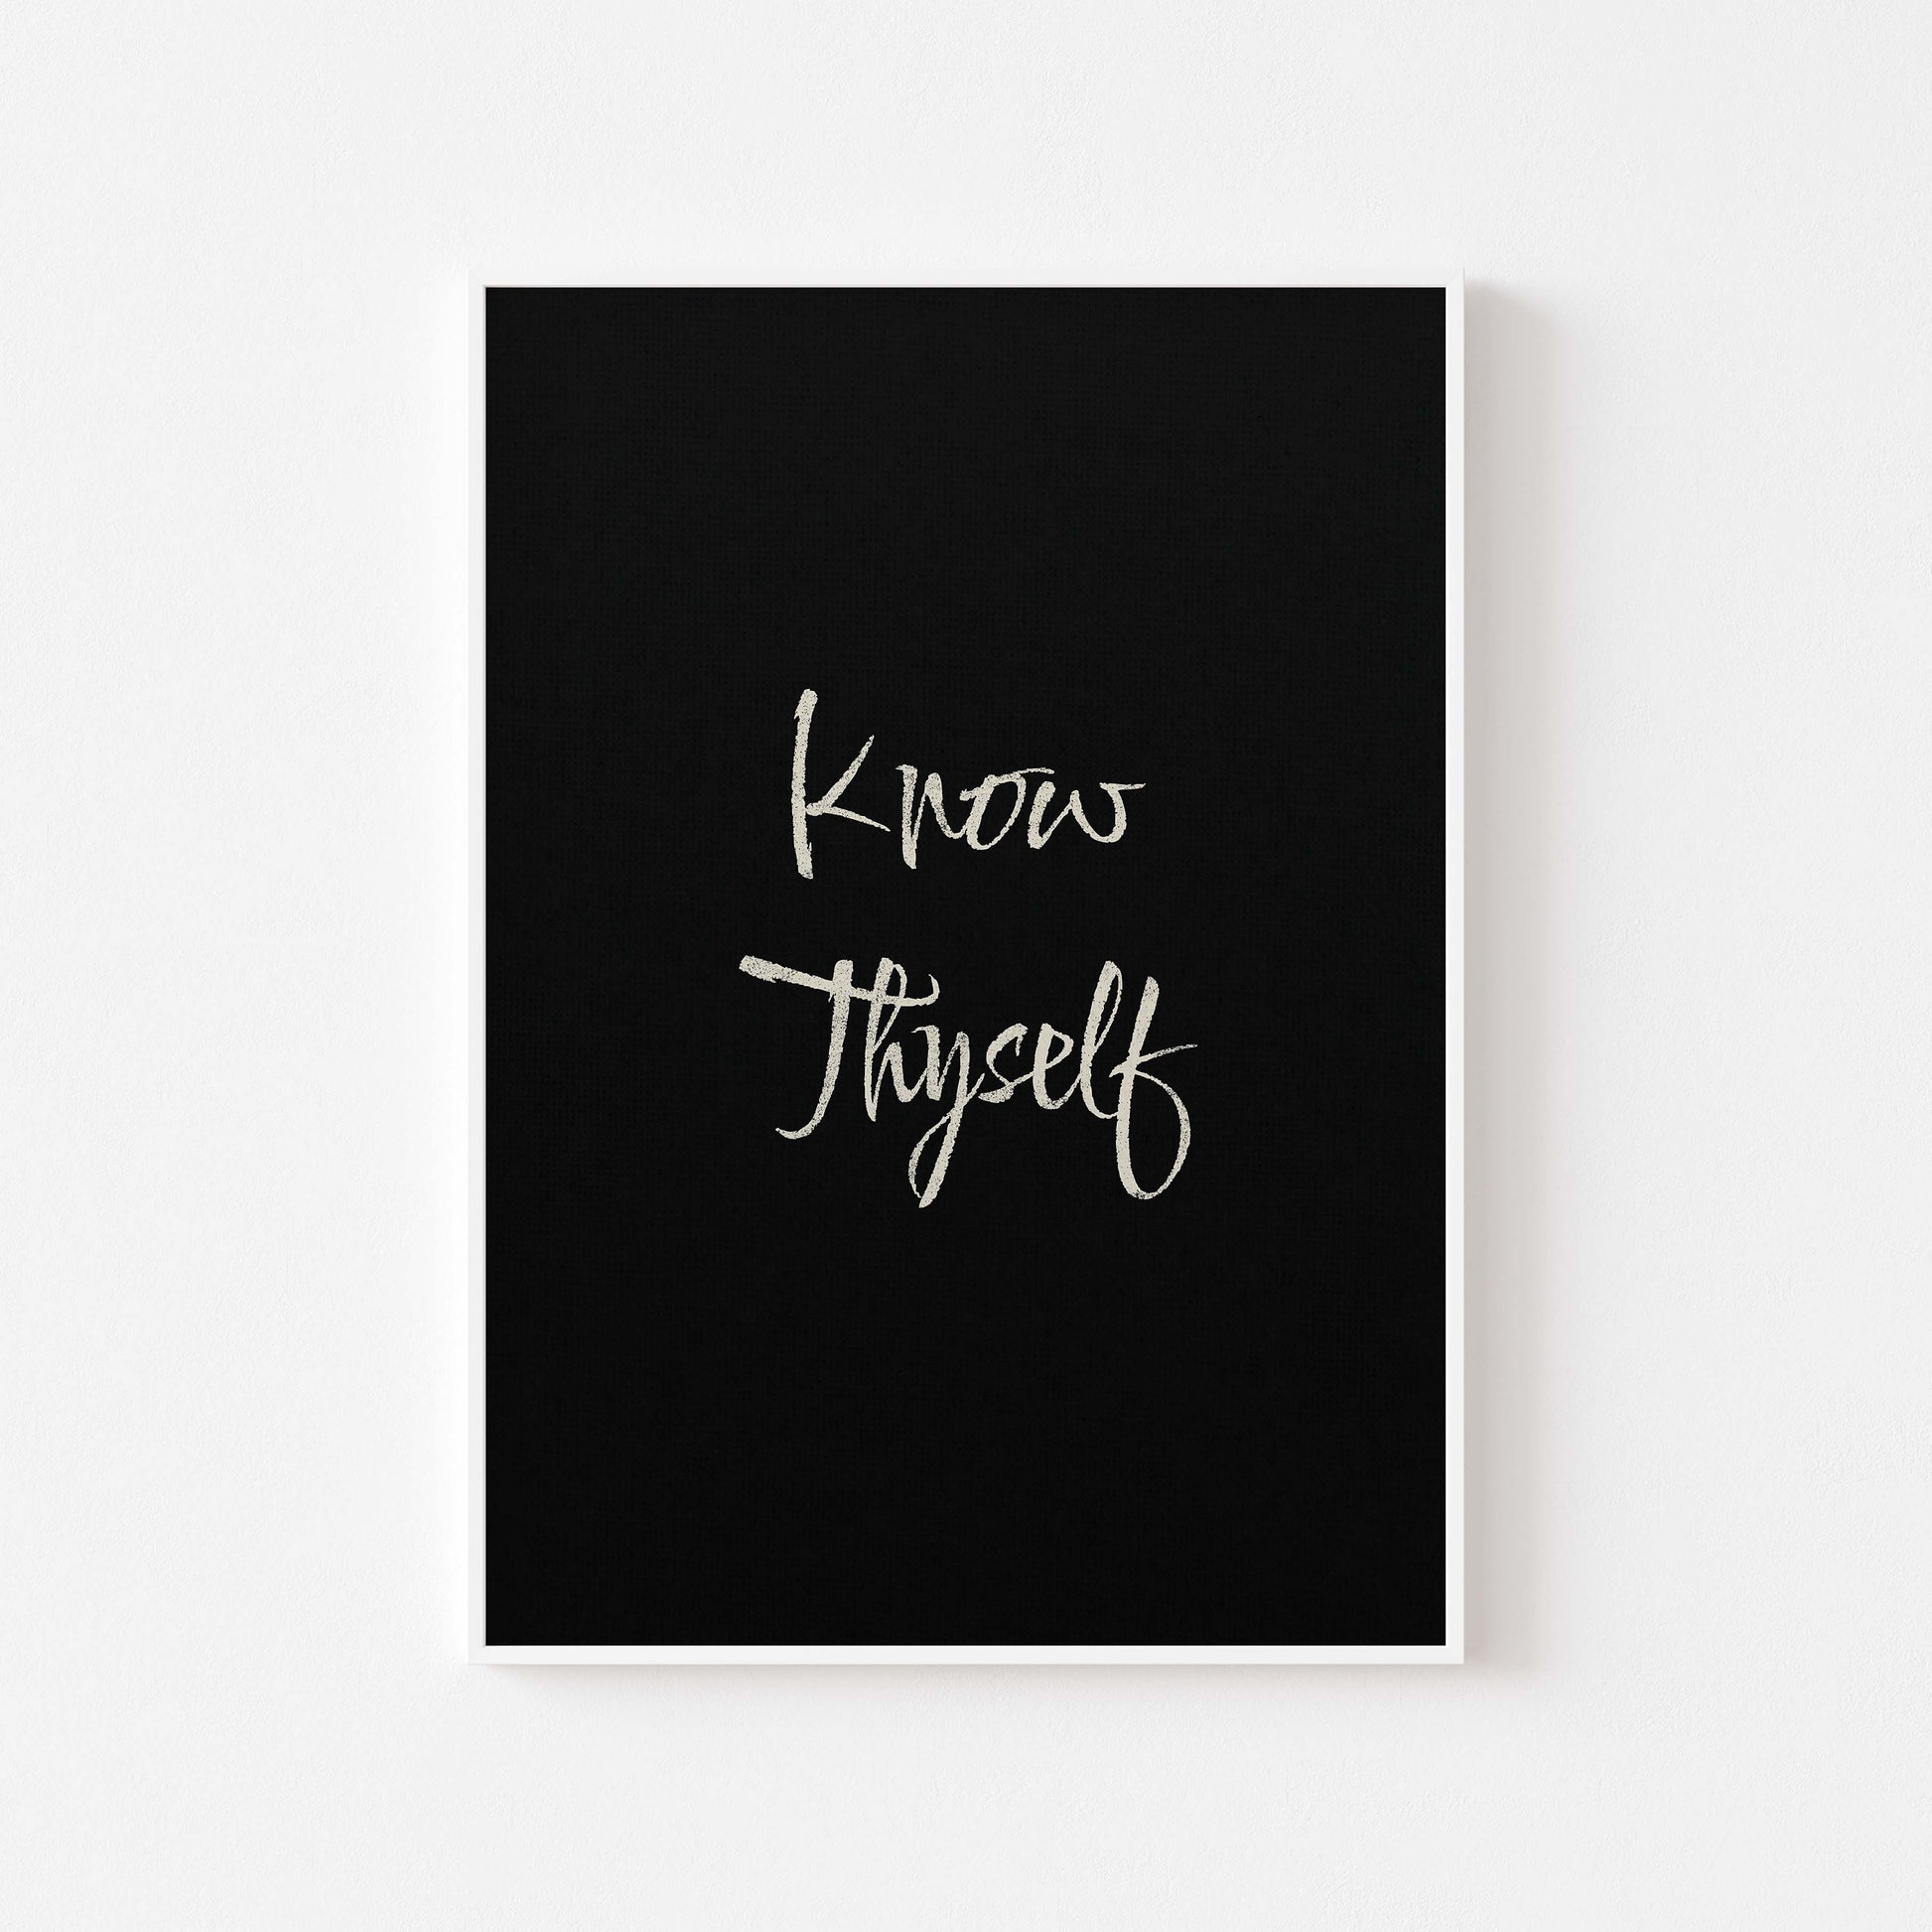 know thyself written in beige on black poster displayed in white frame